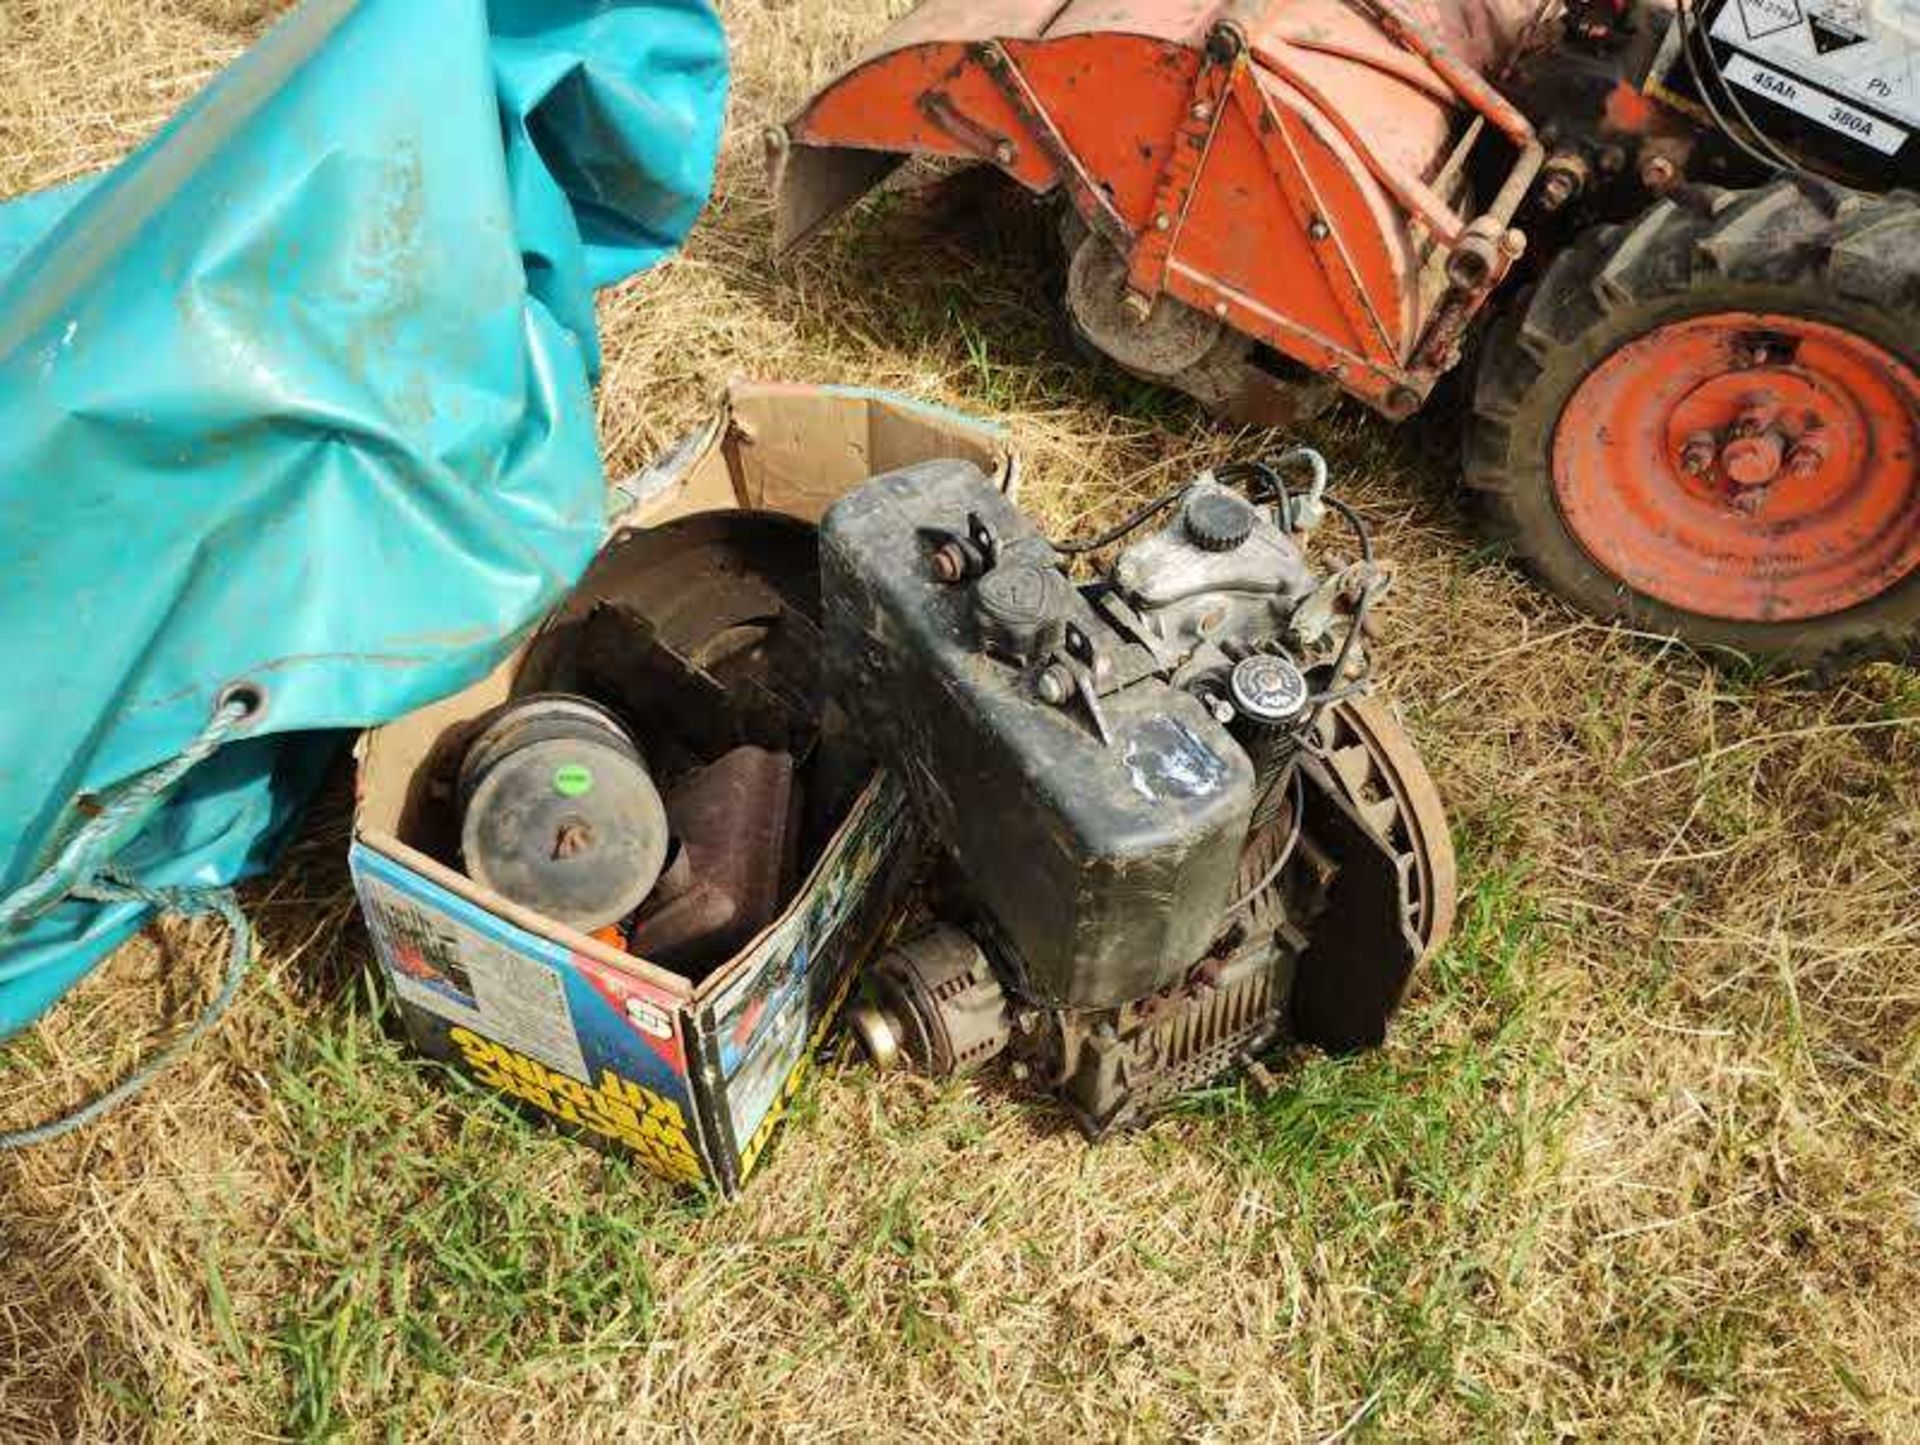 Dowdeswell 650 Rotavator and Parts. Electric Start. Renamed Howard Gem (Spare engine and parts) - Image 3 of 5